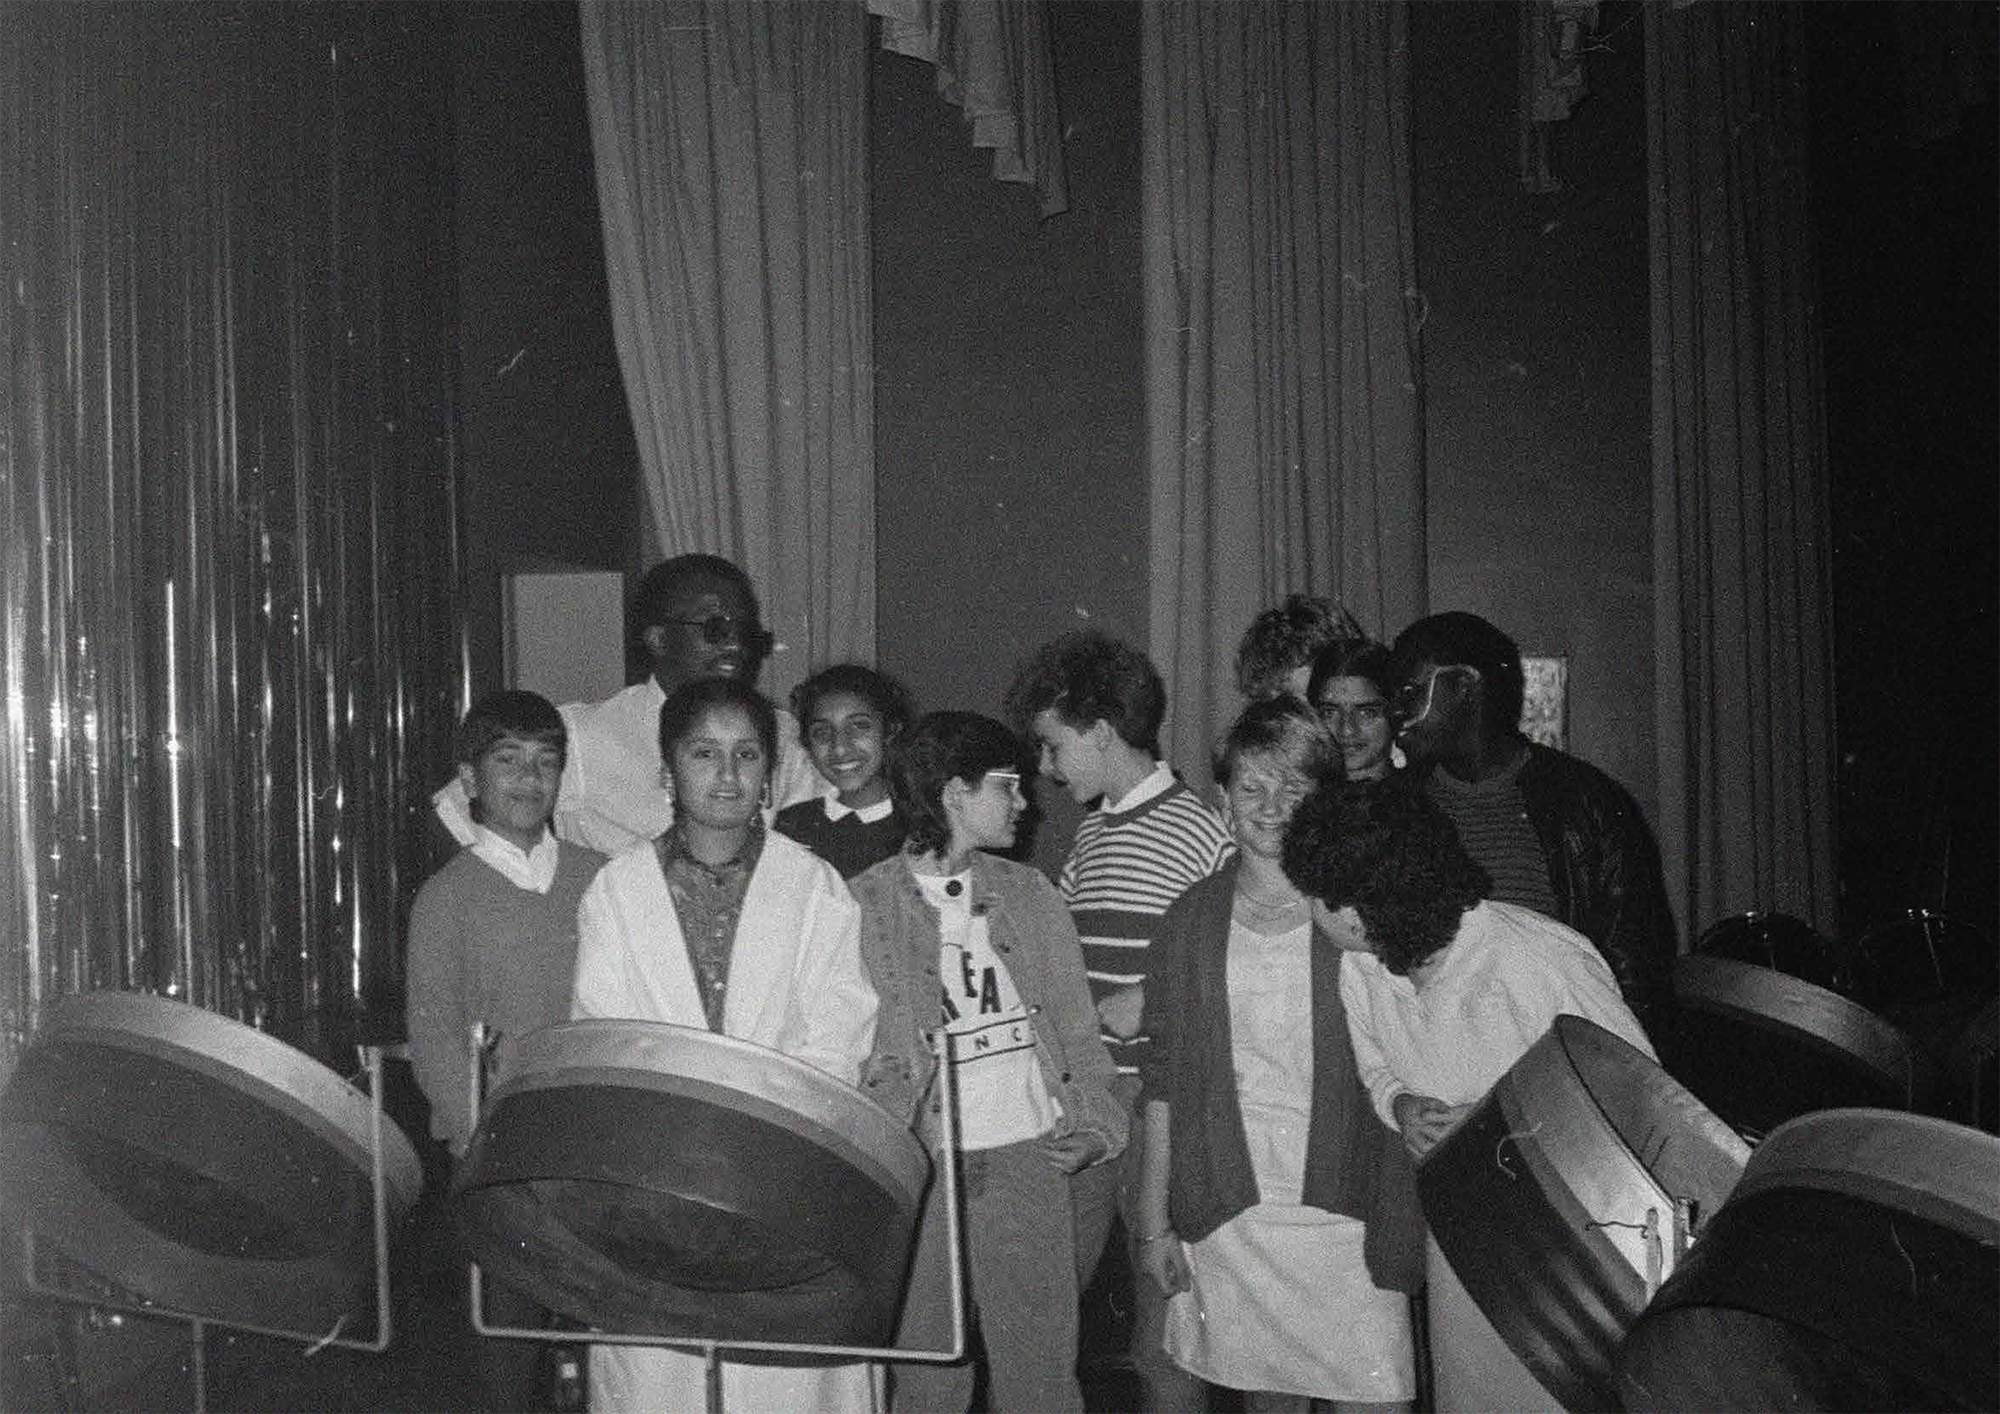 A group of teenagers of different races standing together in the midst of a set of steel drums